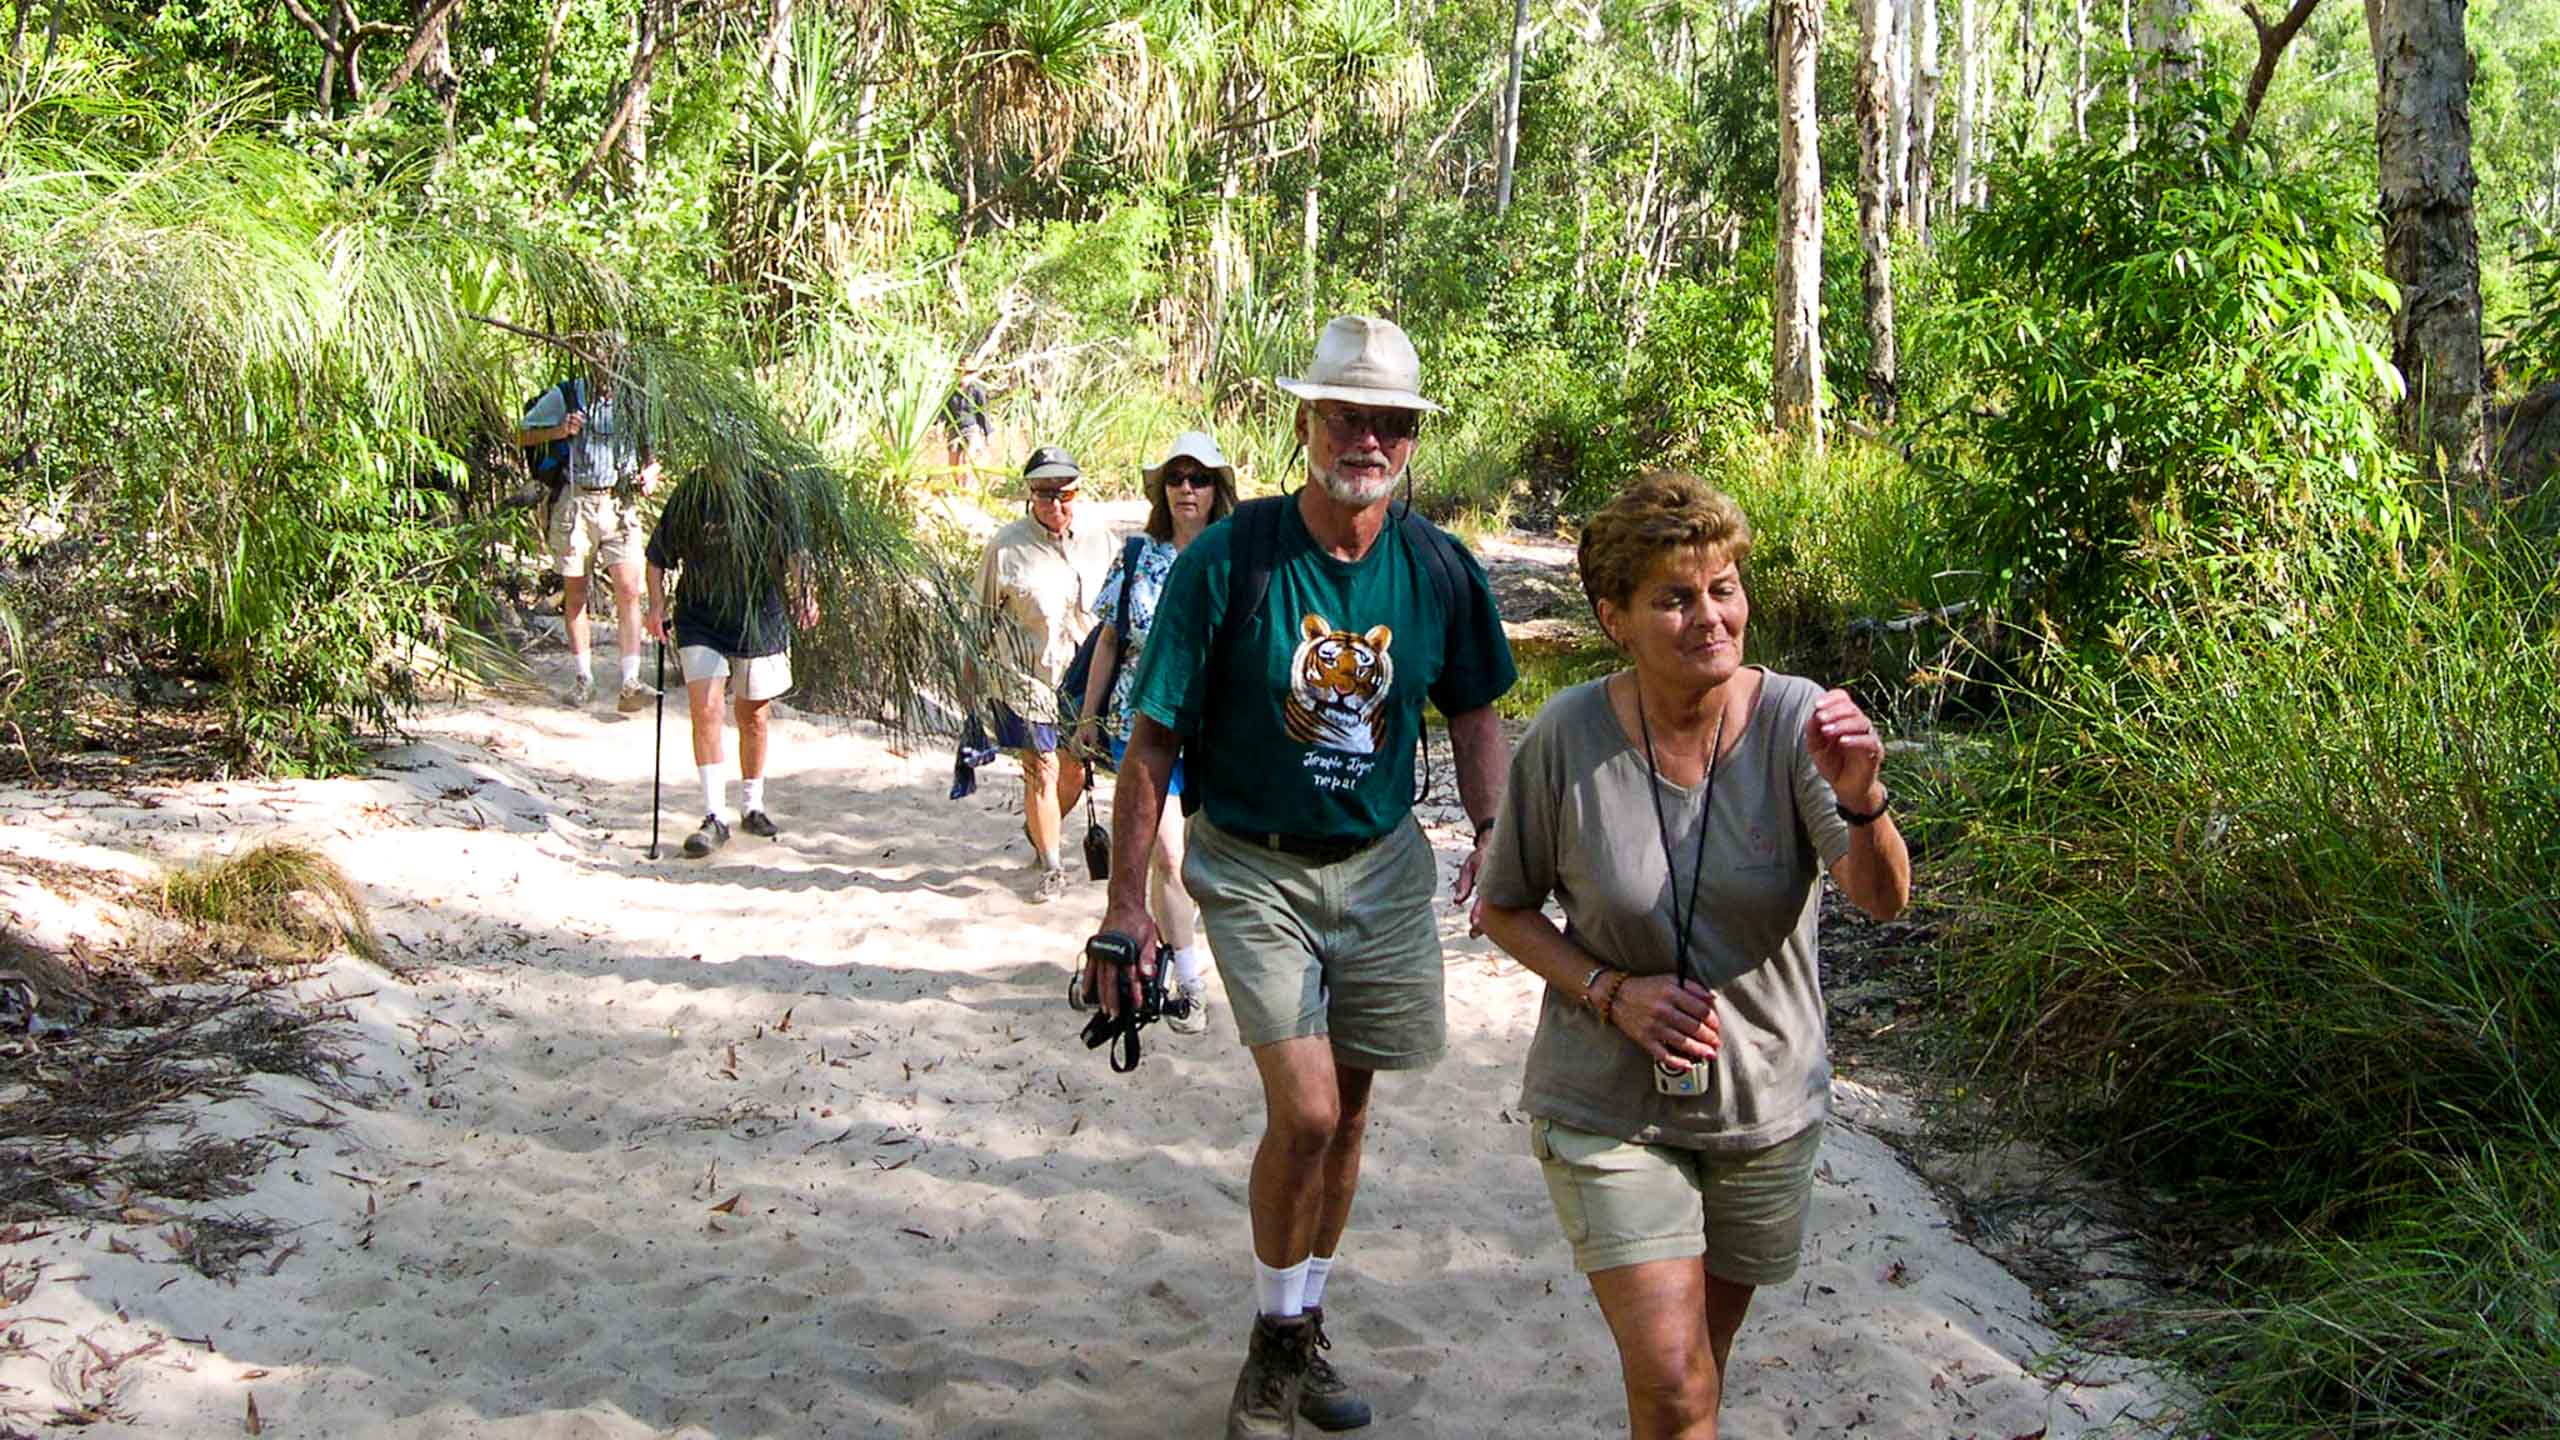 Travel group hikes in Australia forest